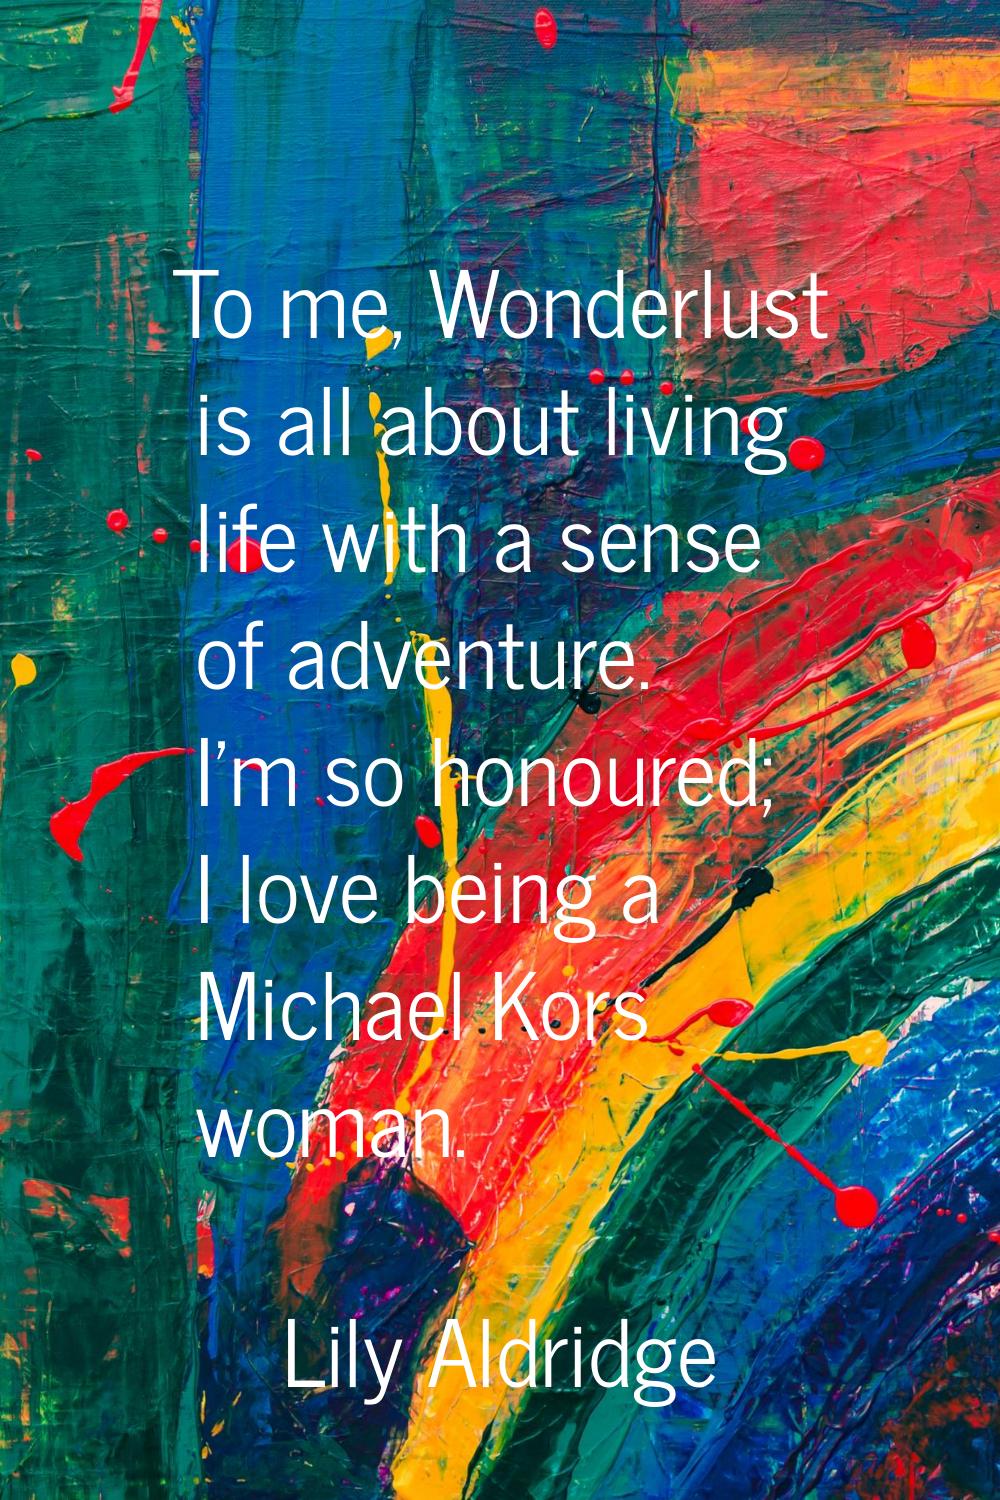 To me, Wonderlust is all about living life with a sense of adventure. I'm so honoured; I love being